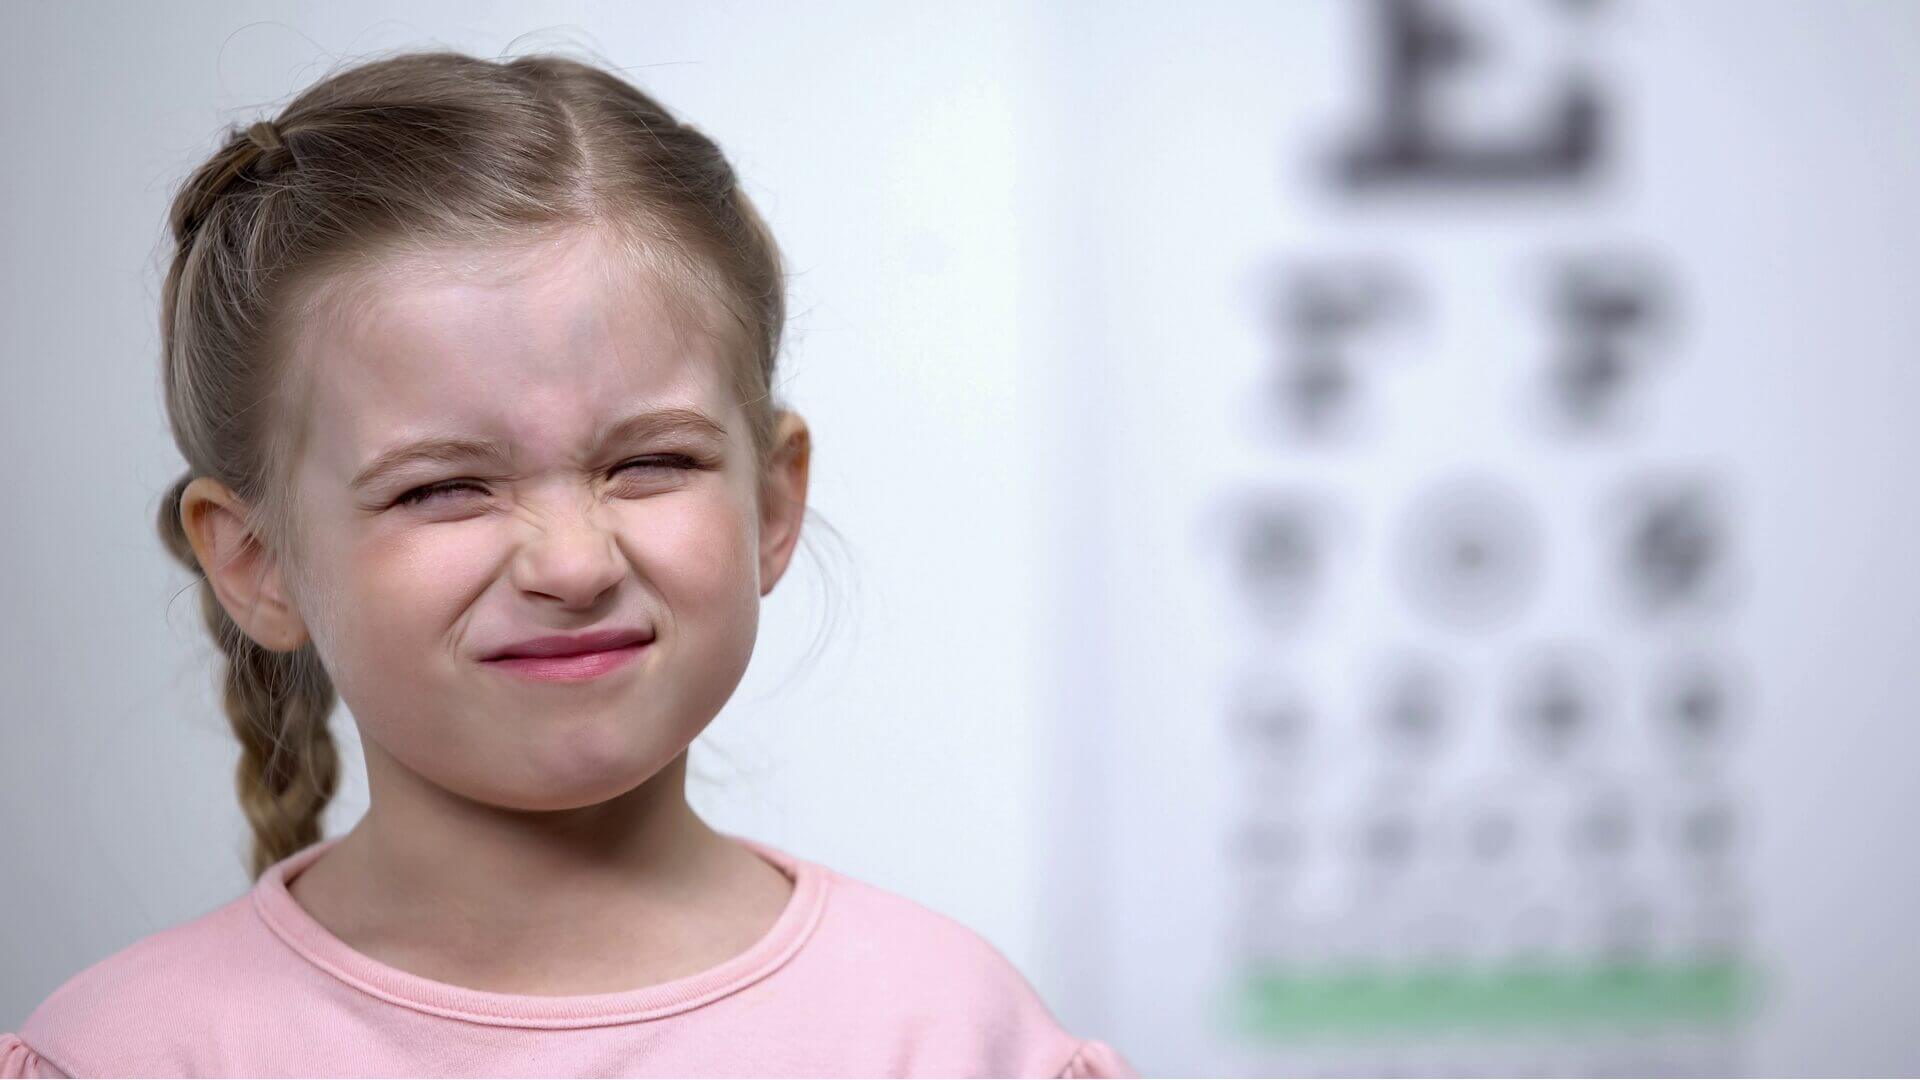 Squinting: Causes, Types, and How to Treat It Optometrist